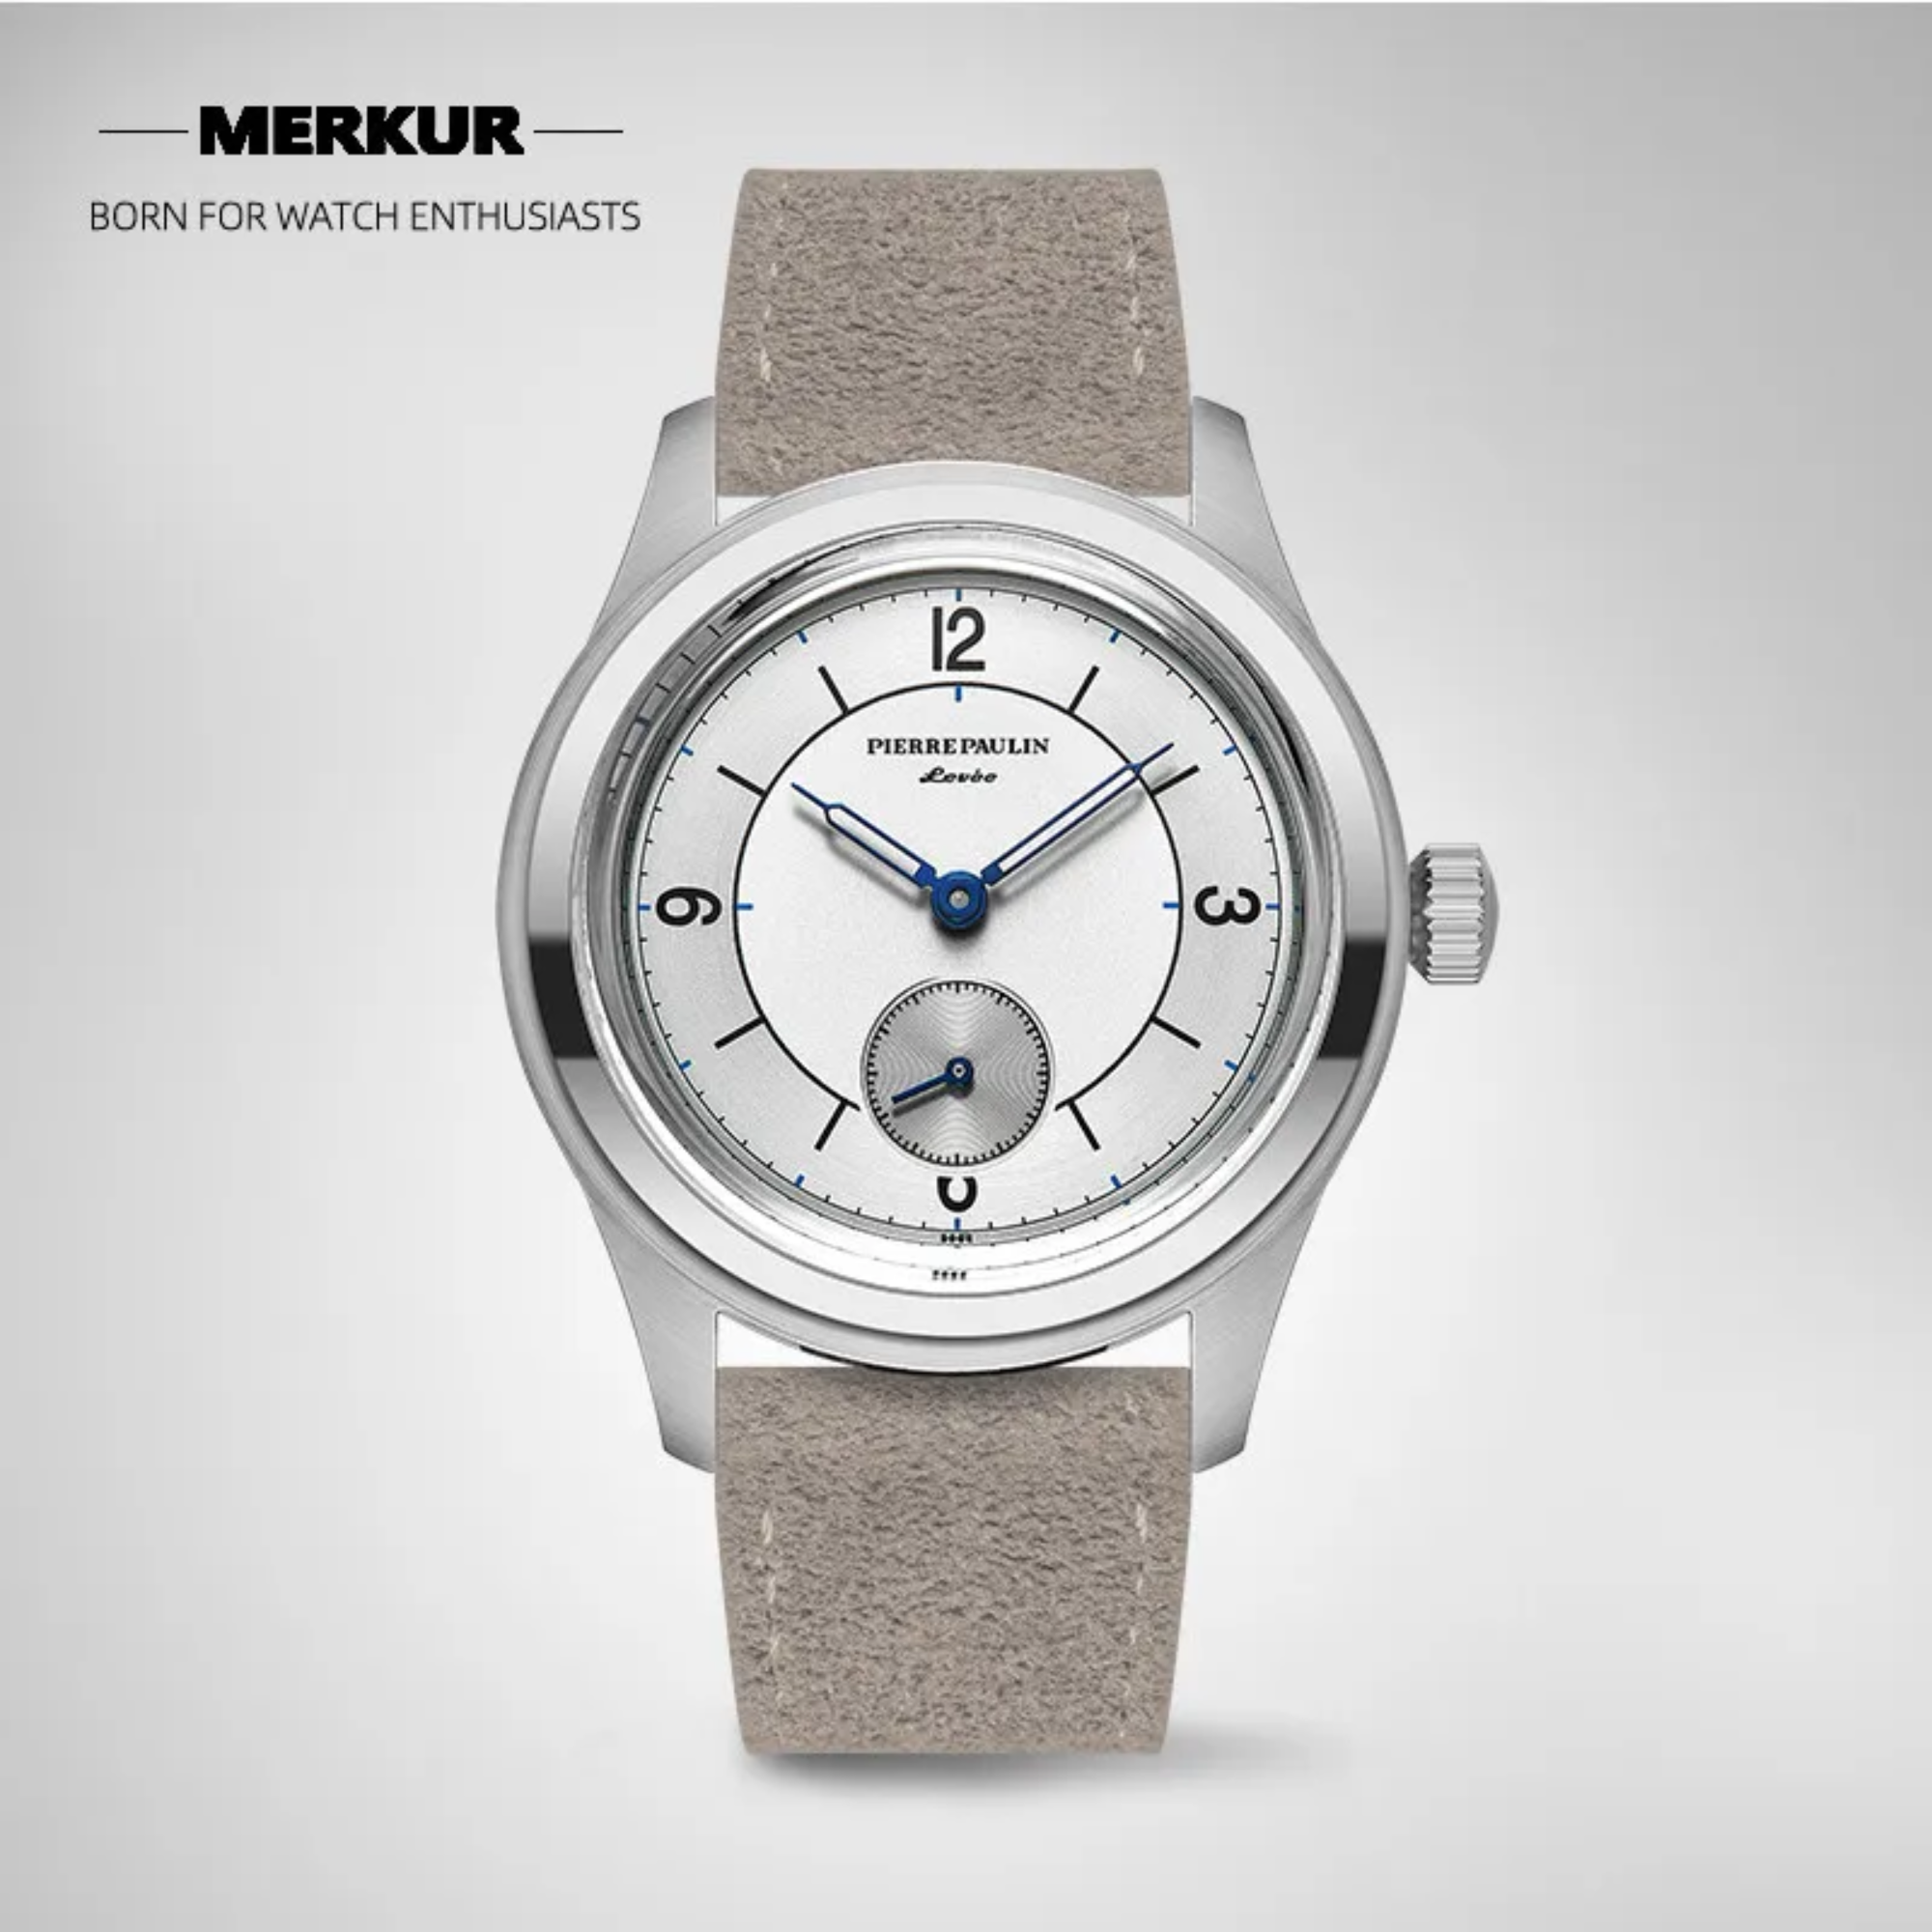 NEW Pierre Paulin business LEVEE series Handwinding Watch Sector Dial Salmon silver dial Vintage Casual Watch Mens watch dream-watches.com india